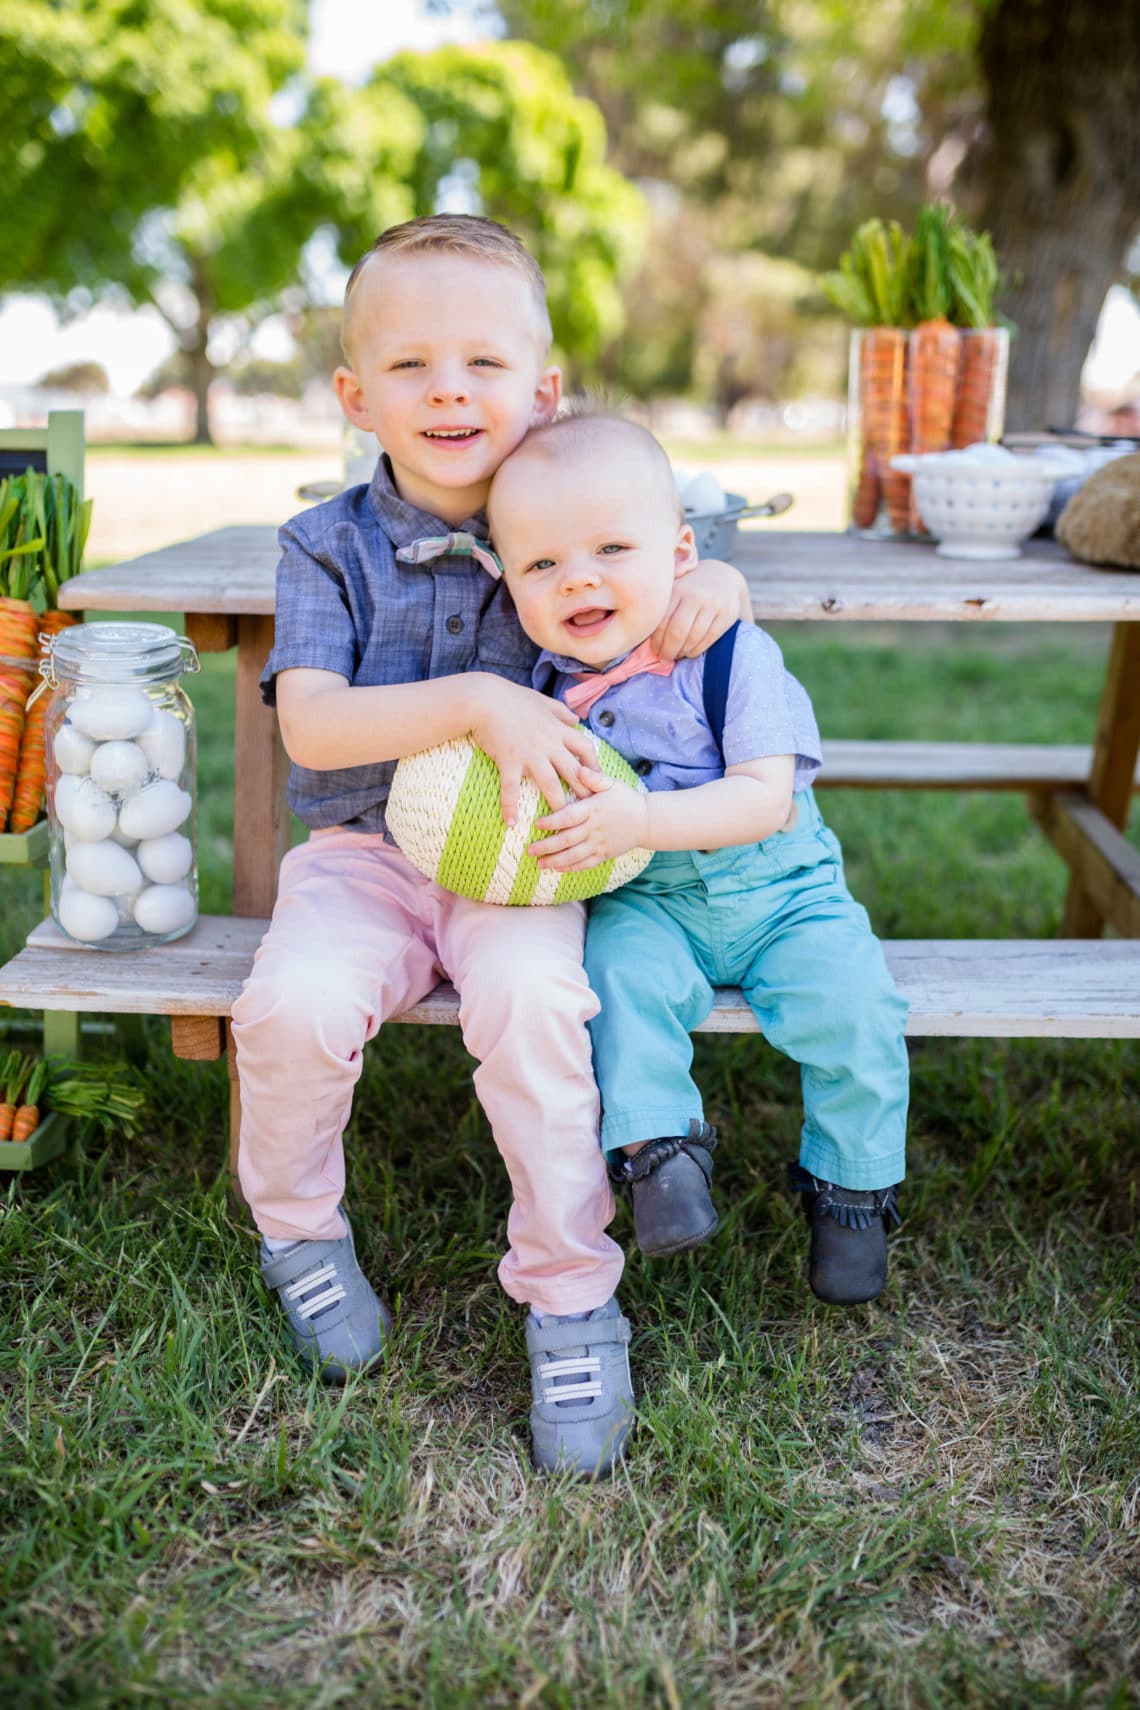 Easter Outfits for Kids: Where to Find the Cutest Easter Outfits